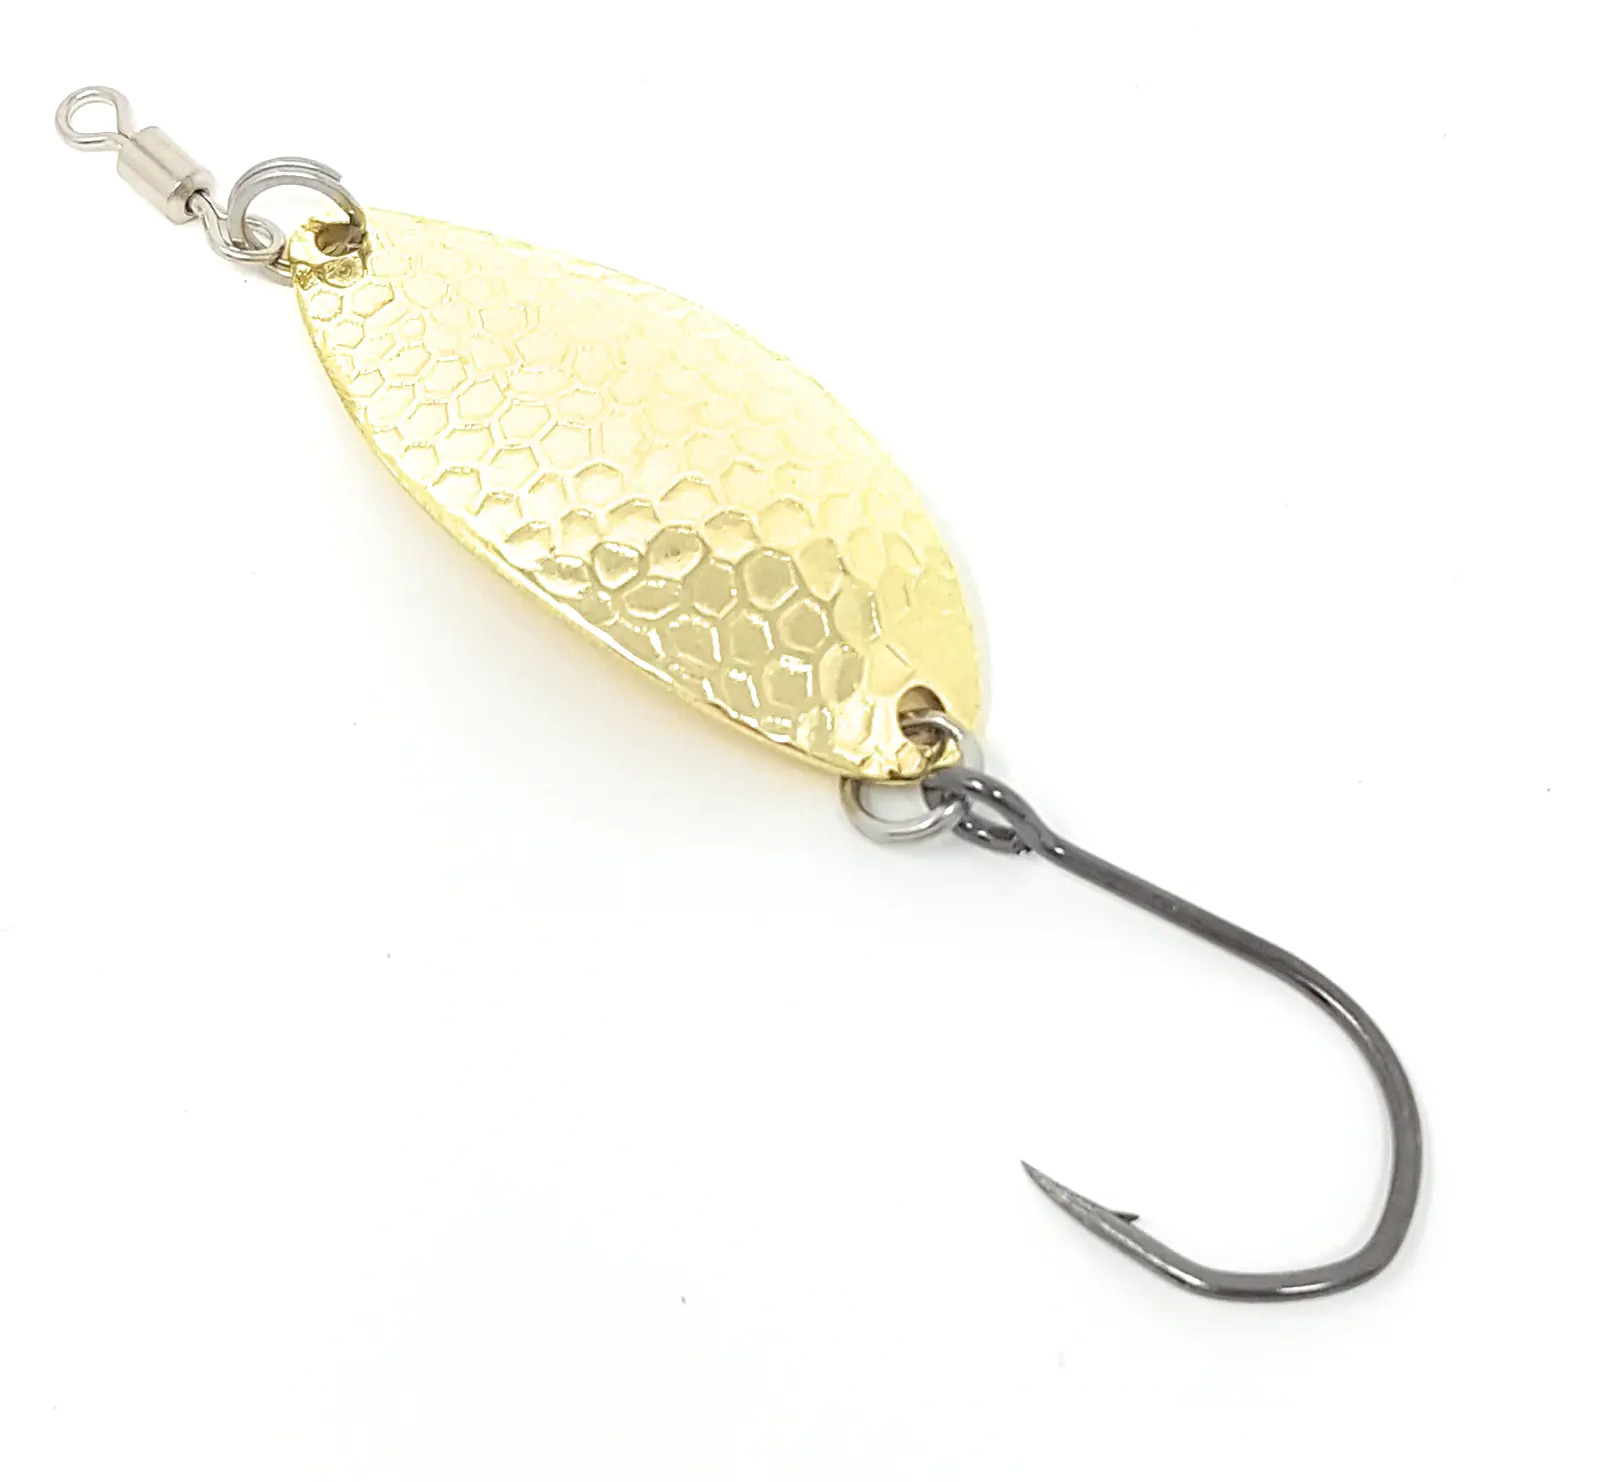 PRIME LURES GLORY SPOONS - OVAL 2/5 oz silver copper